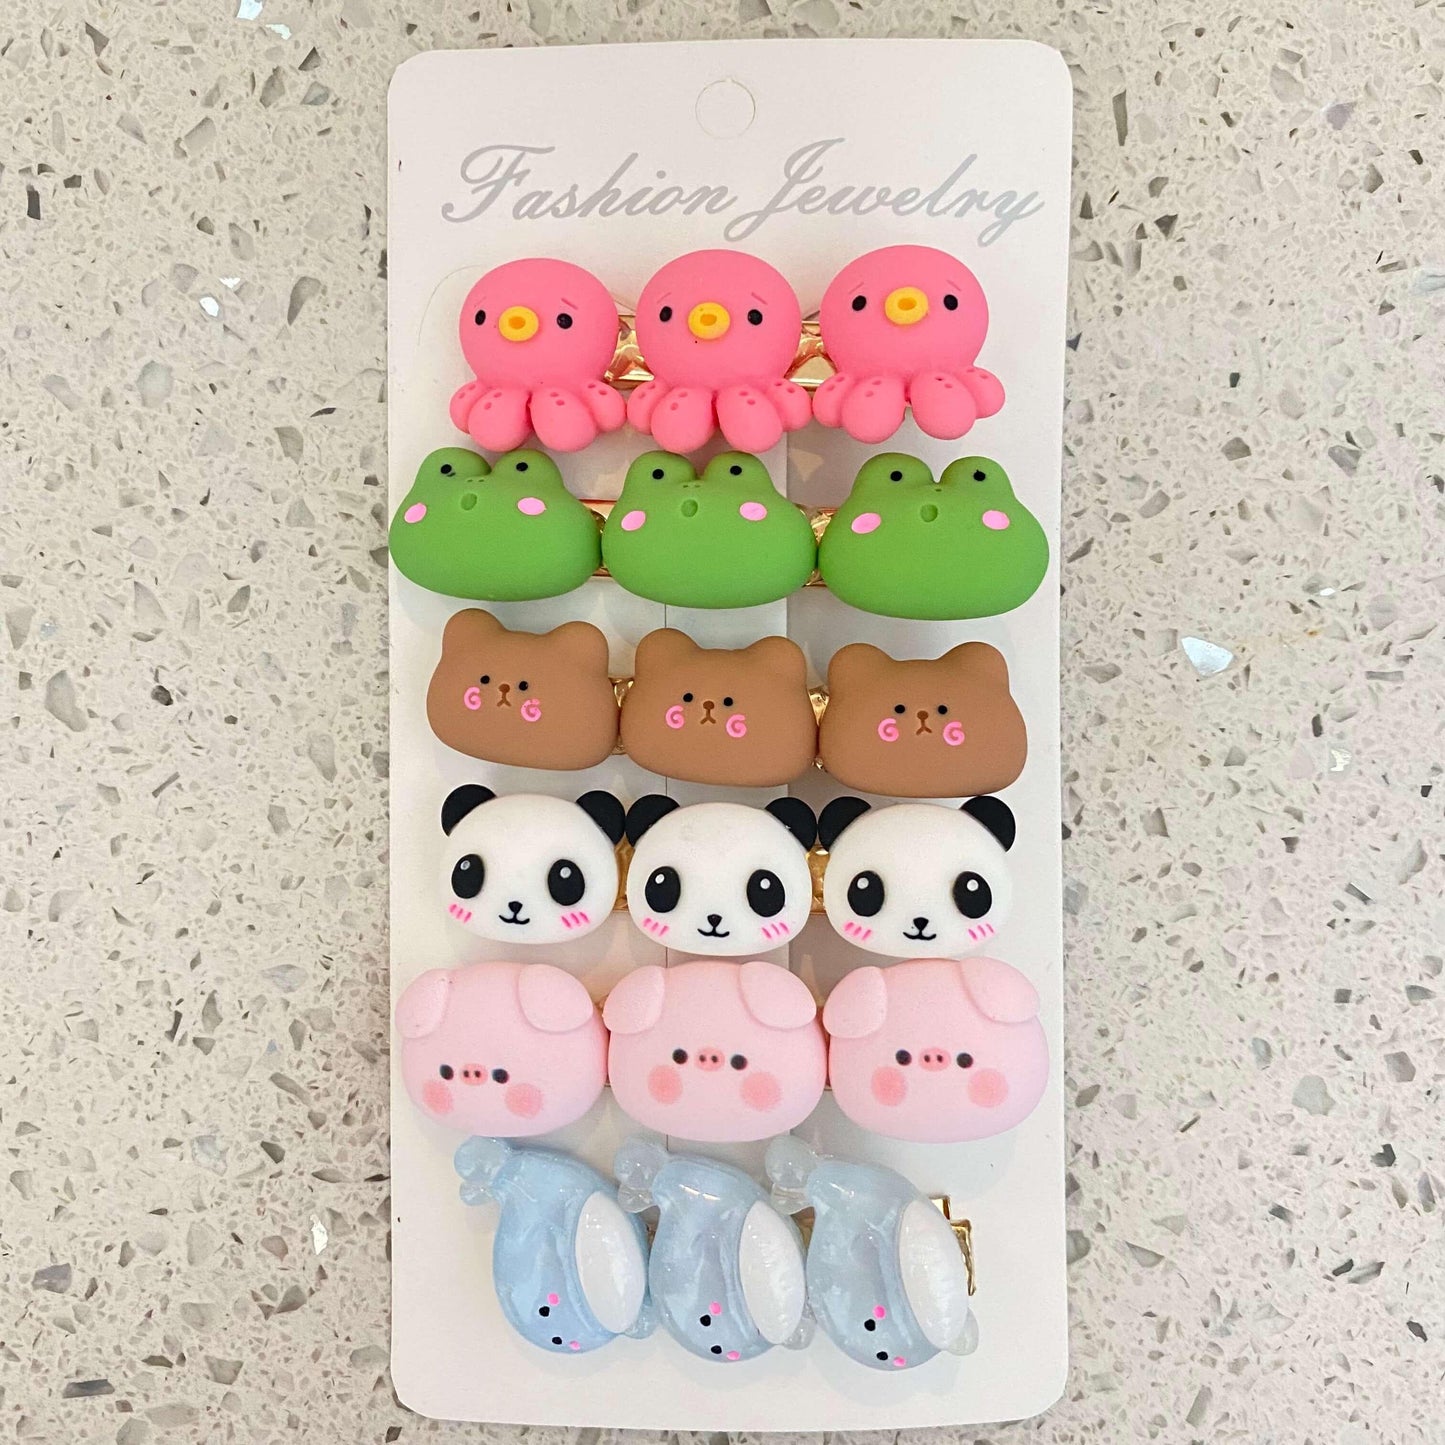 [SPECIAL SCOOP] 1 Scoop of Cute Kawaii Animals/Fruits/Food Hair Clips (NO RESTOCKING) - Belle Rose Nails